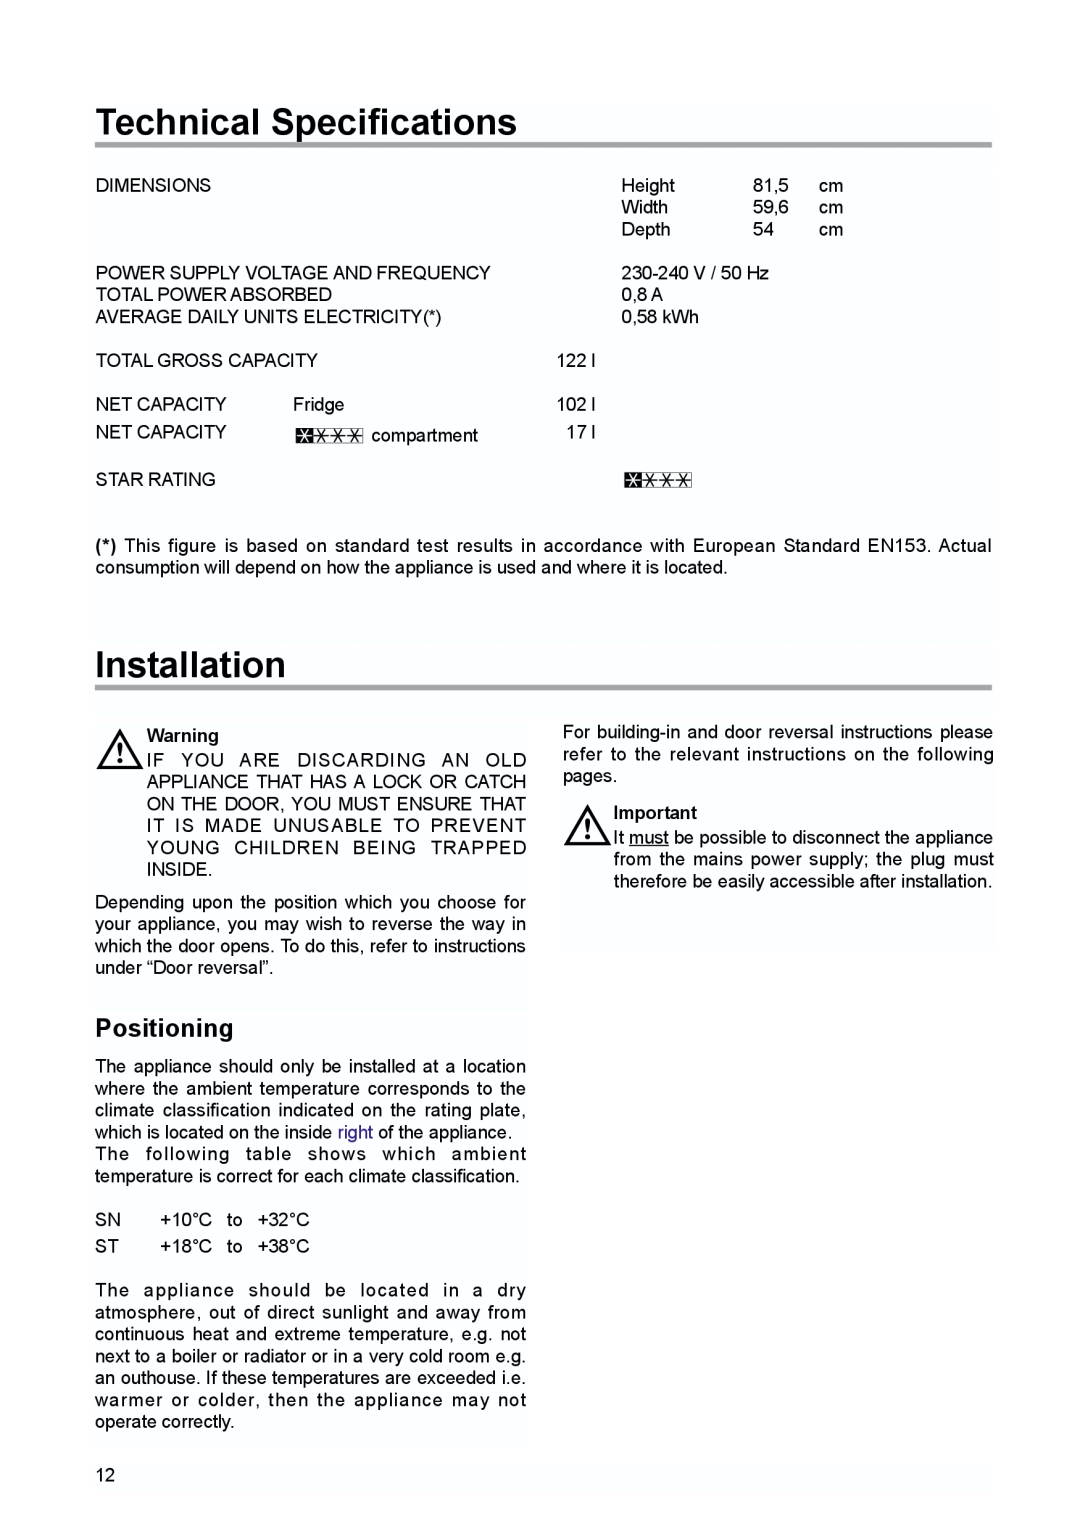 Zanussi ZQS 6124 manual Technical Specifications, Installation, Positioning 